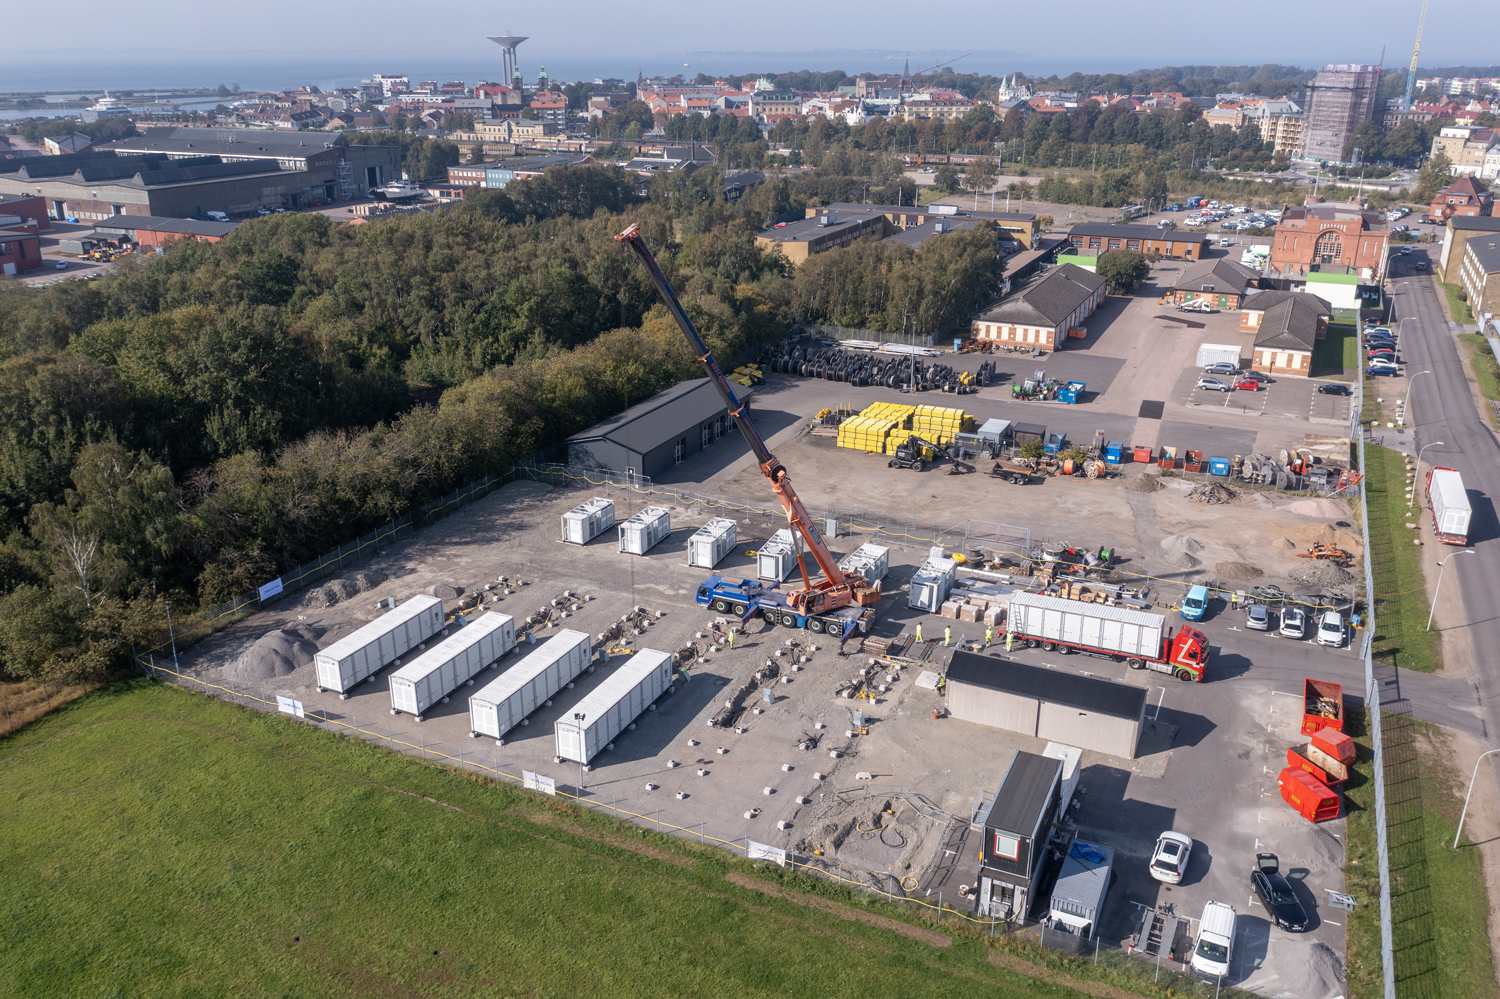 The lithium-ion based battery storage will begin operations in 2024. Axpo is continuing to expand its battery capacities. The 20MW/20MWh will be connected to the grid in Landskrona, Sweden, by the local energy company Landskrona Energie.